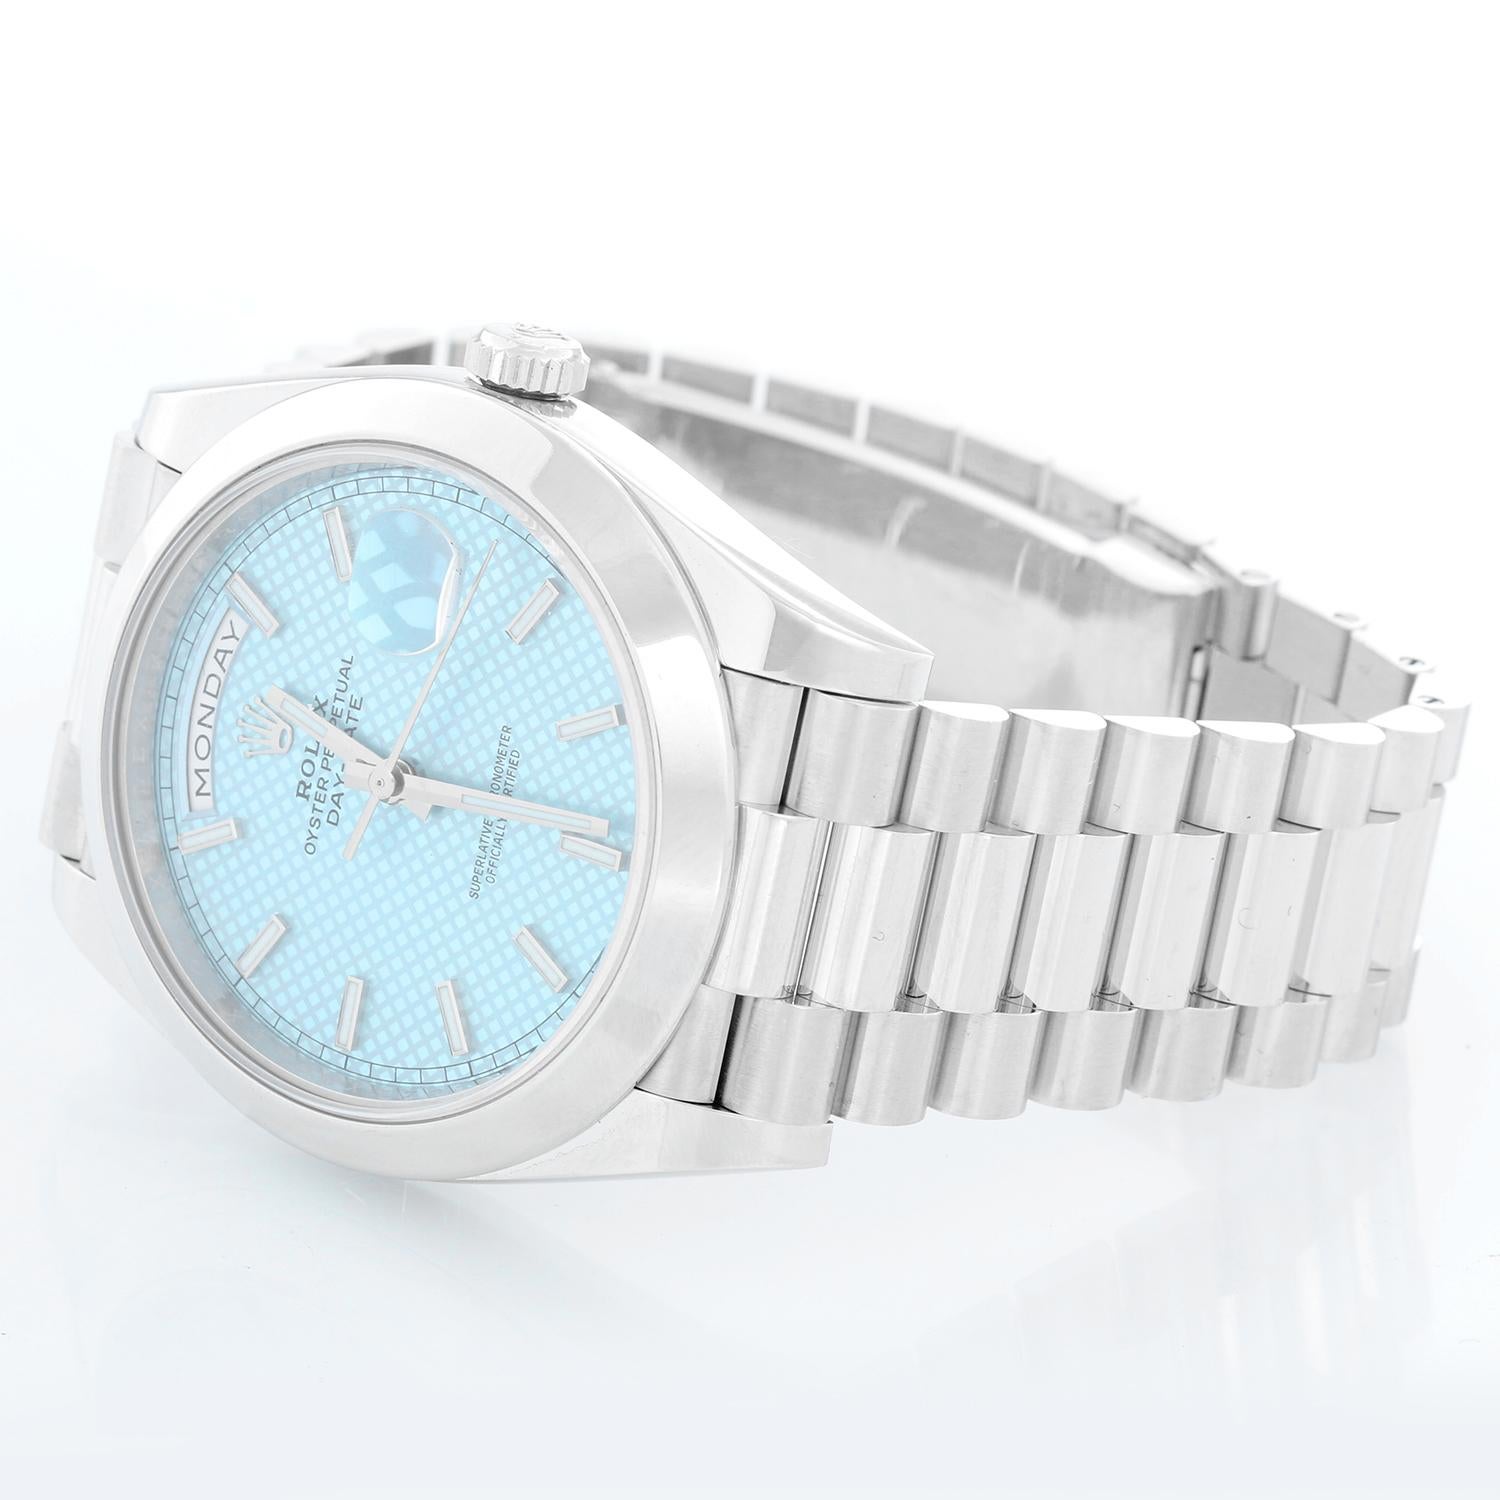 Rolex Platinum President  Day-Date Men's Watch 228206 - Automatic winding, 31 jewels, Quickset, sapphire crystal. Platinum case with smooth bezel ( 40 mm ). Ice Blue with dial markers and diagonal motif. Platinum hidden clasp President bracelet.